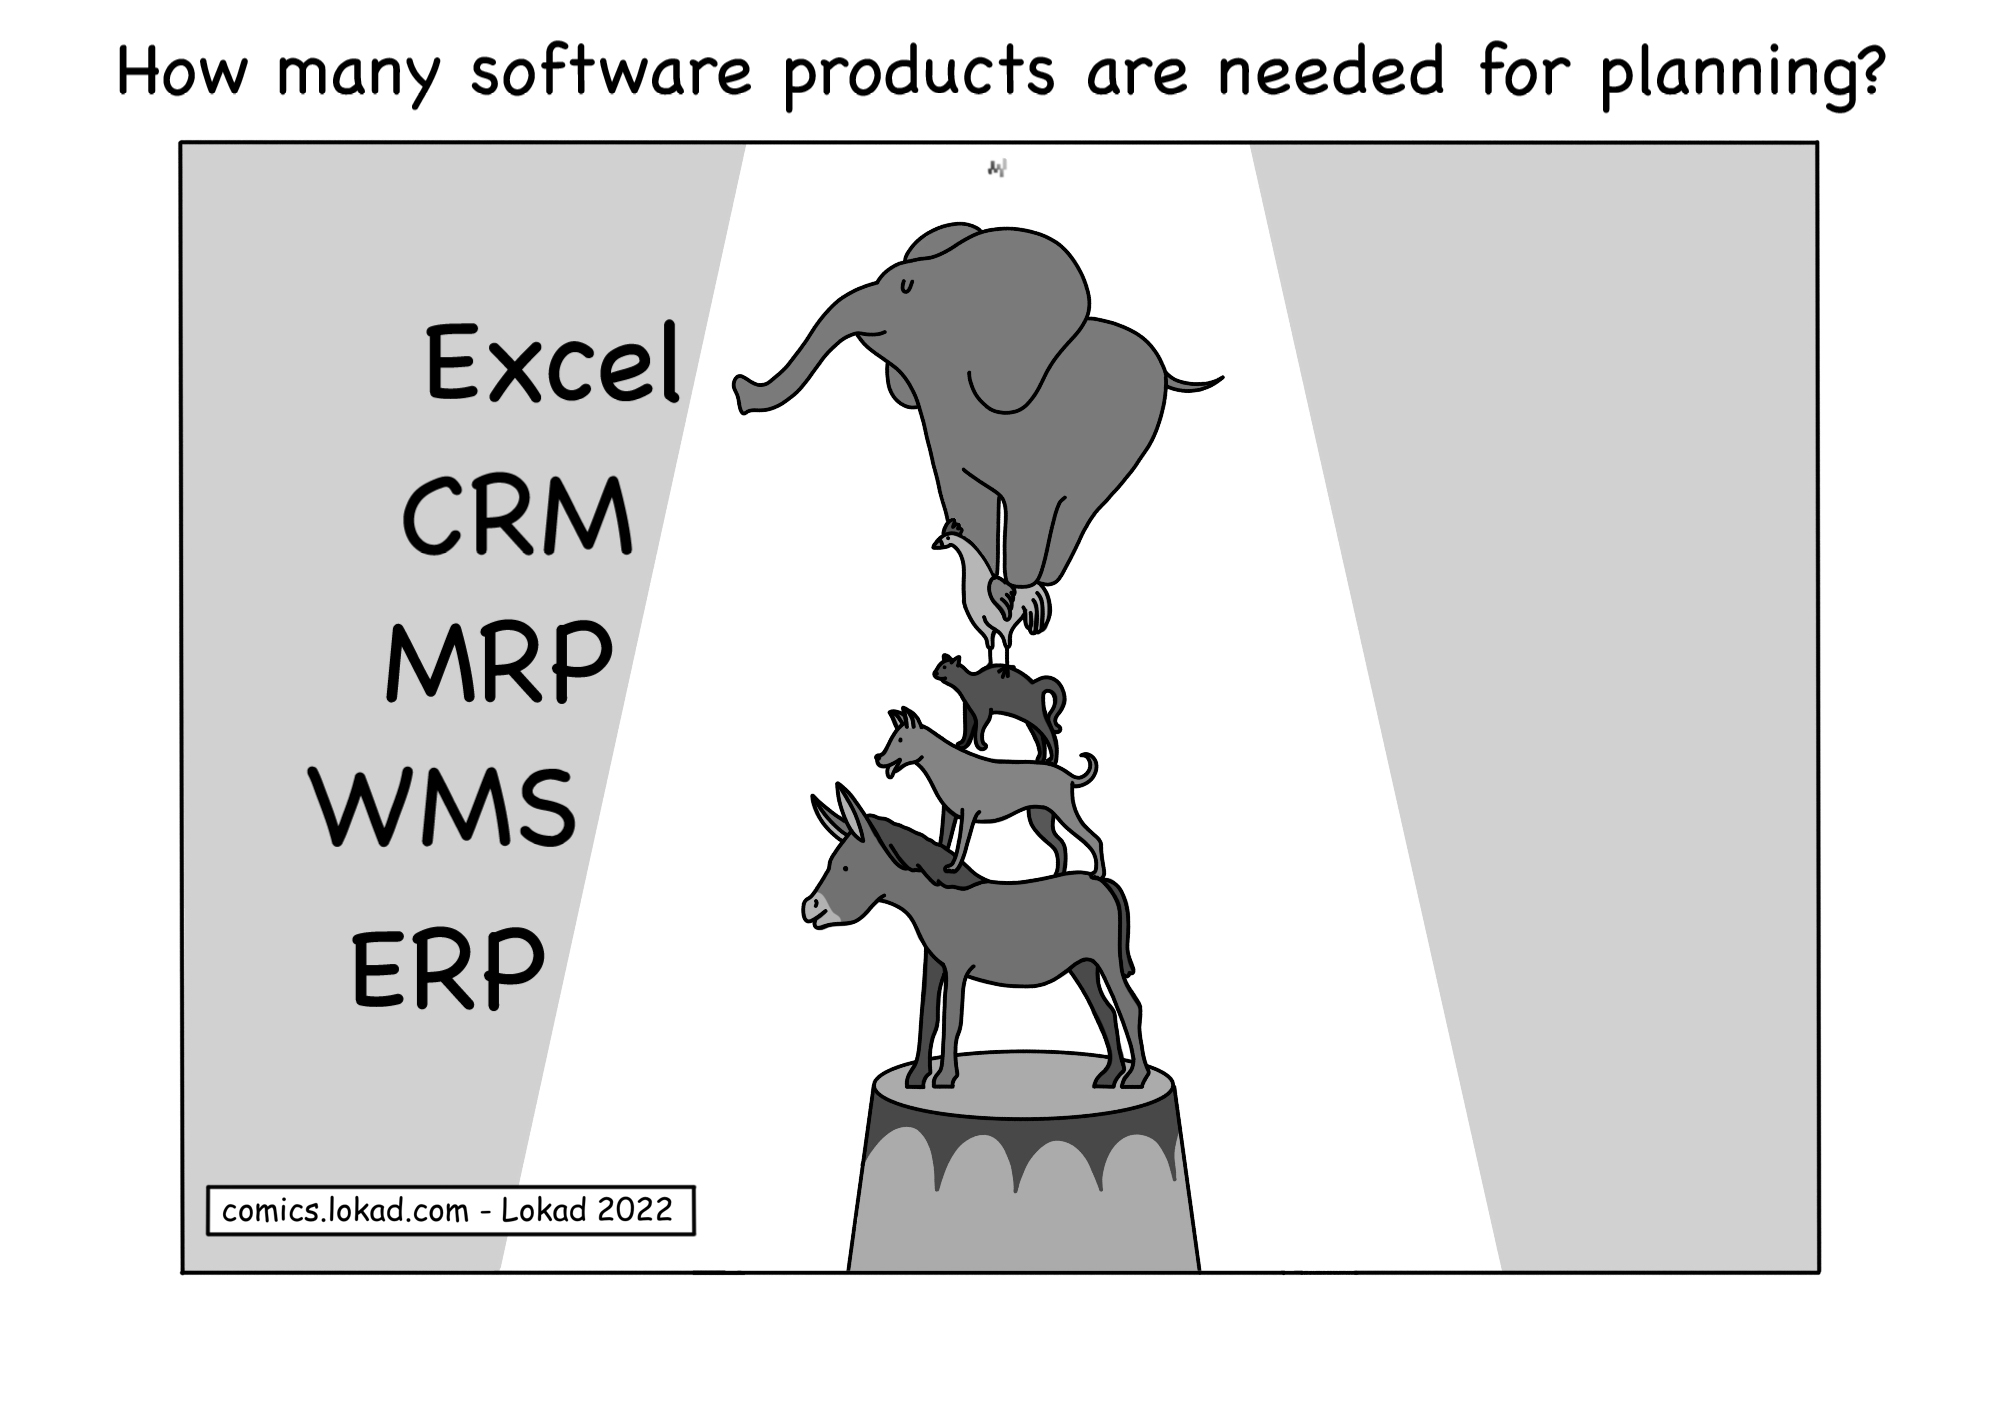 How many software products are needed for planning?